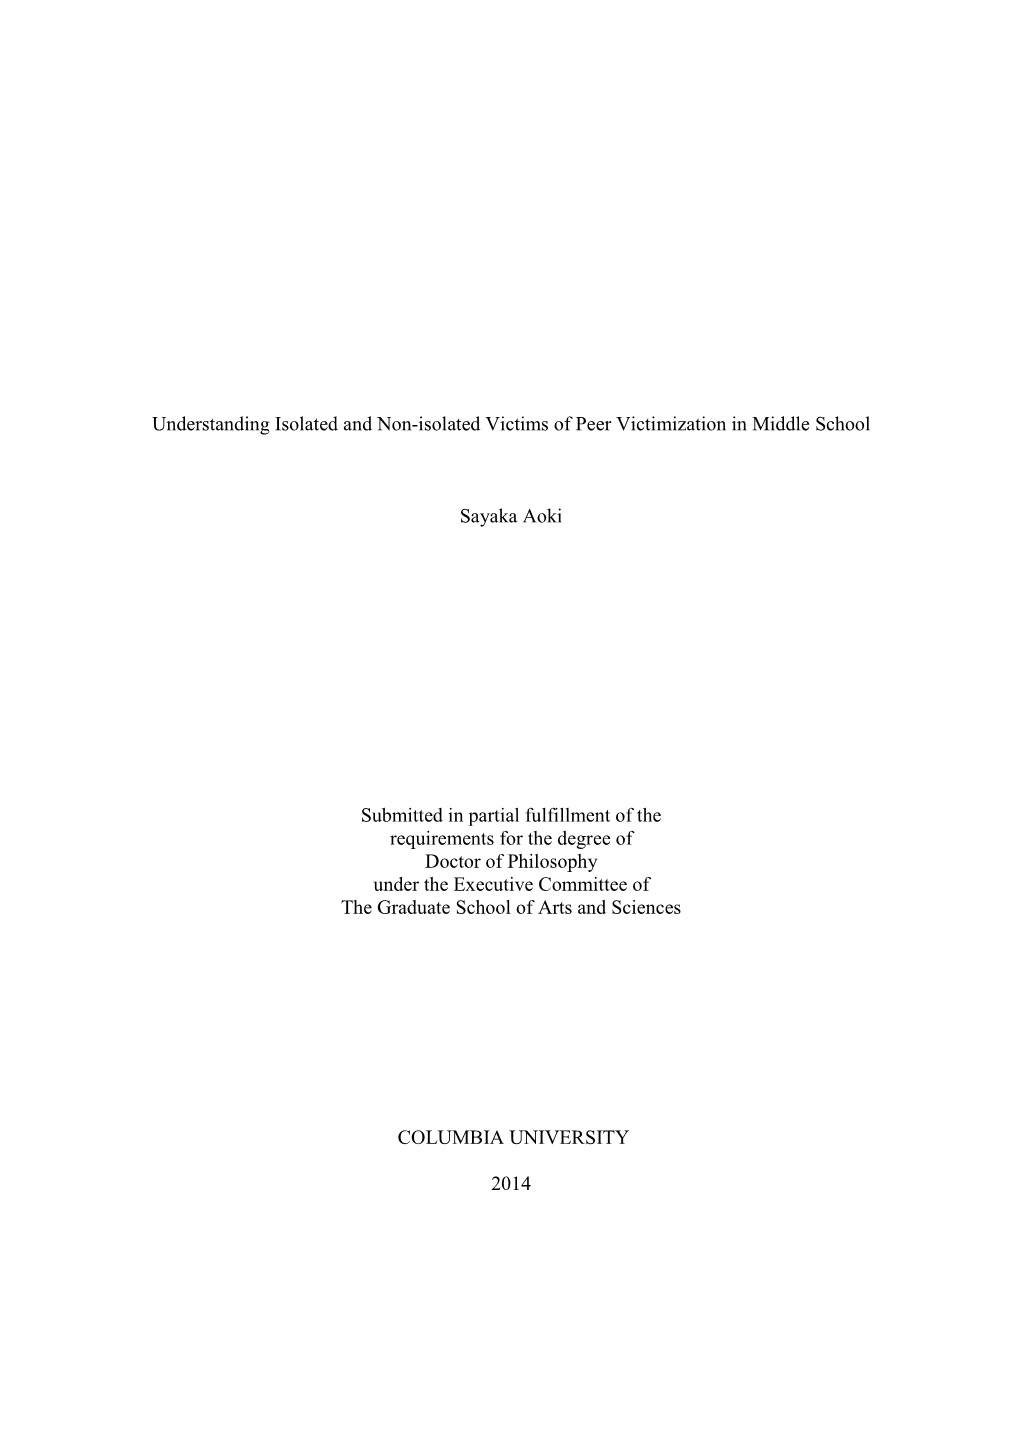 Understanding Isolated and Non-Isolated Victims of Peer Victimization in Middle School